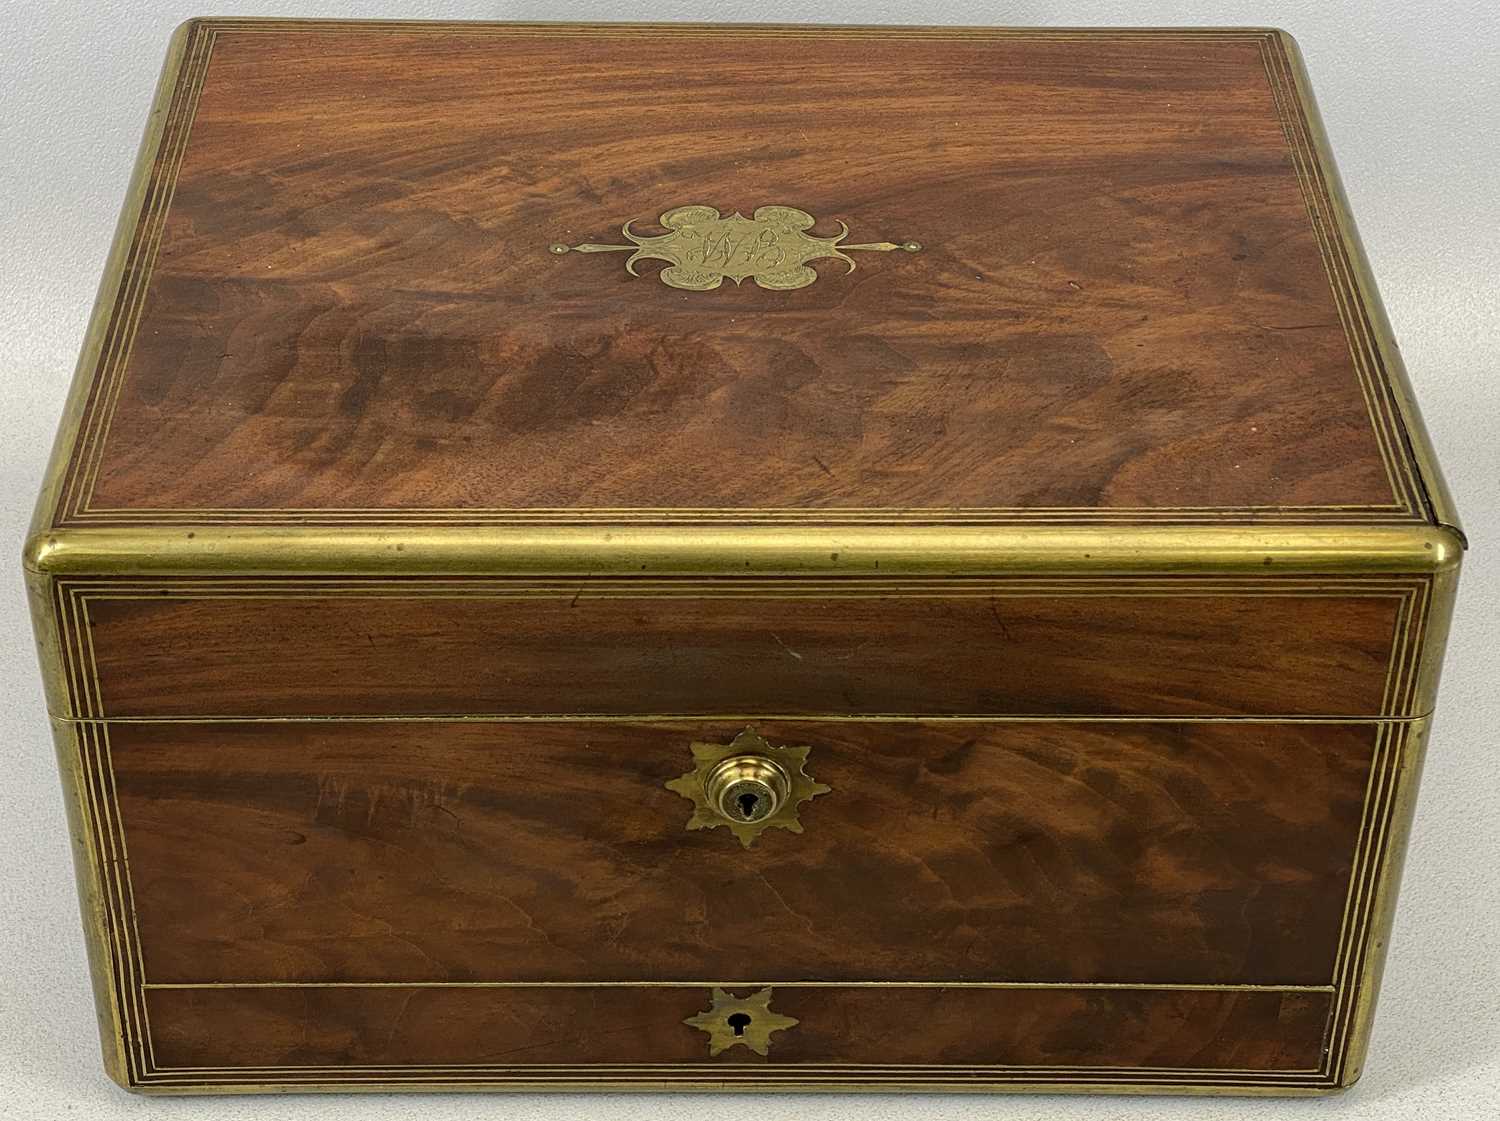 VICTORIAN MAHOGANY & BRASS BOUND TRAVELLING VANITY / JEWELLERY CASE AND CONTENTS, comprising 14 x - Image 3 of 5